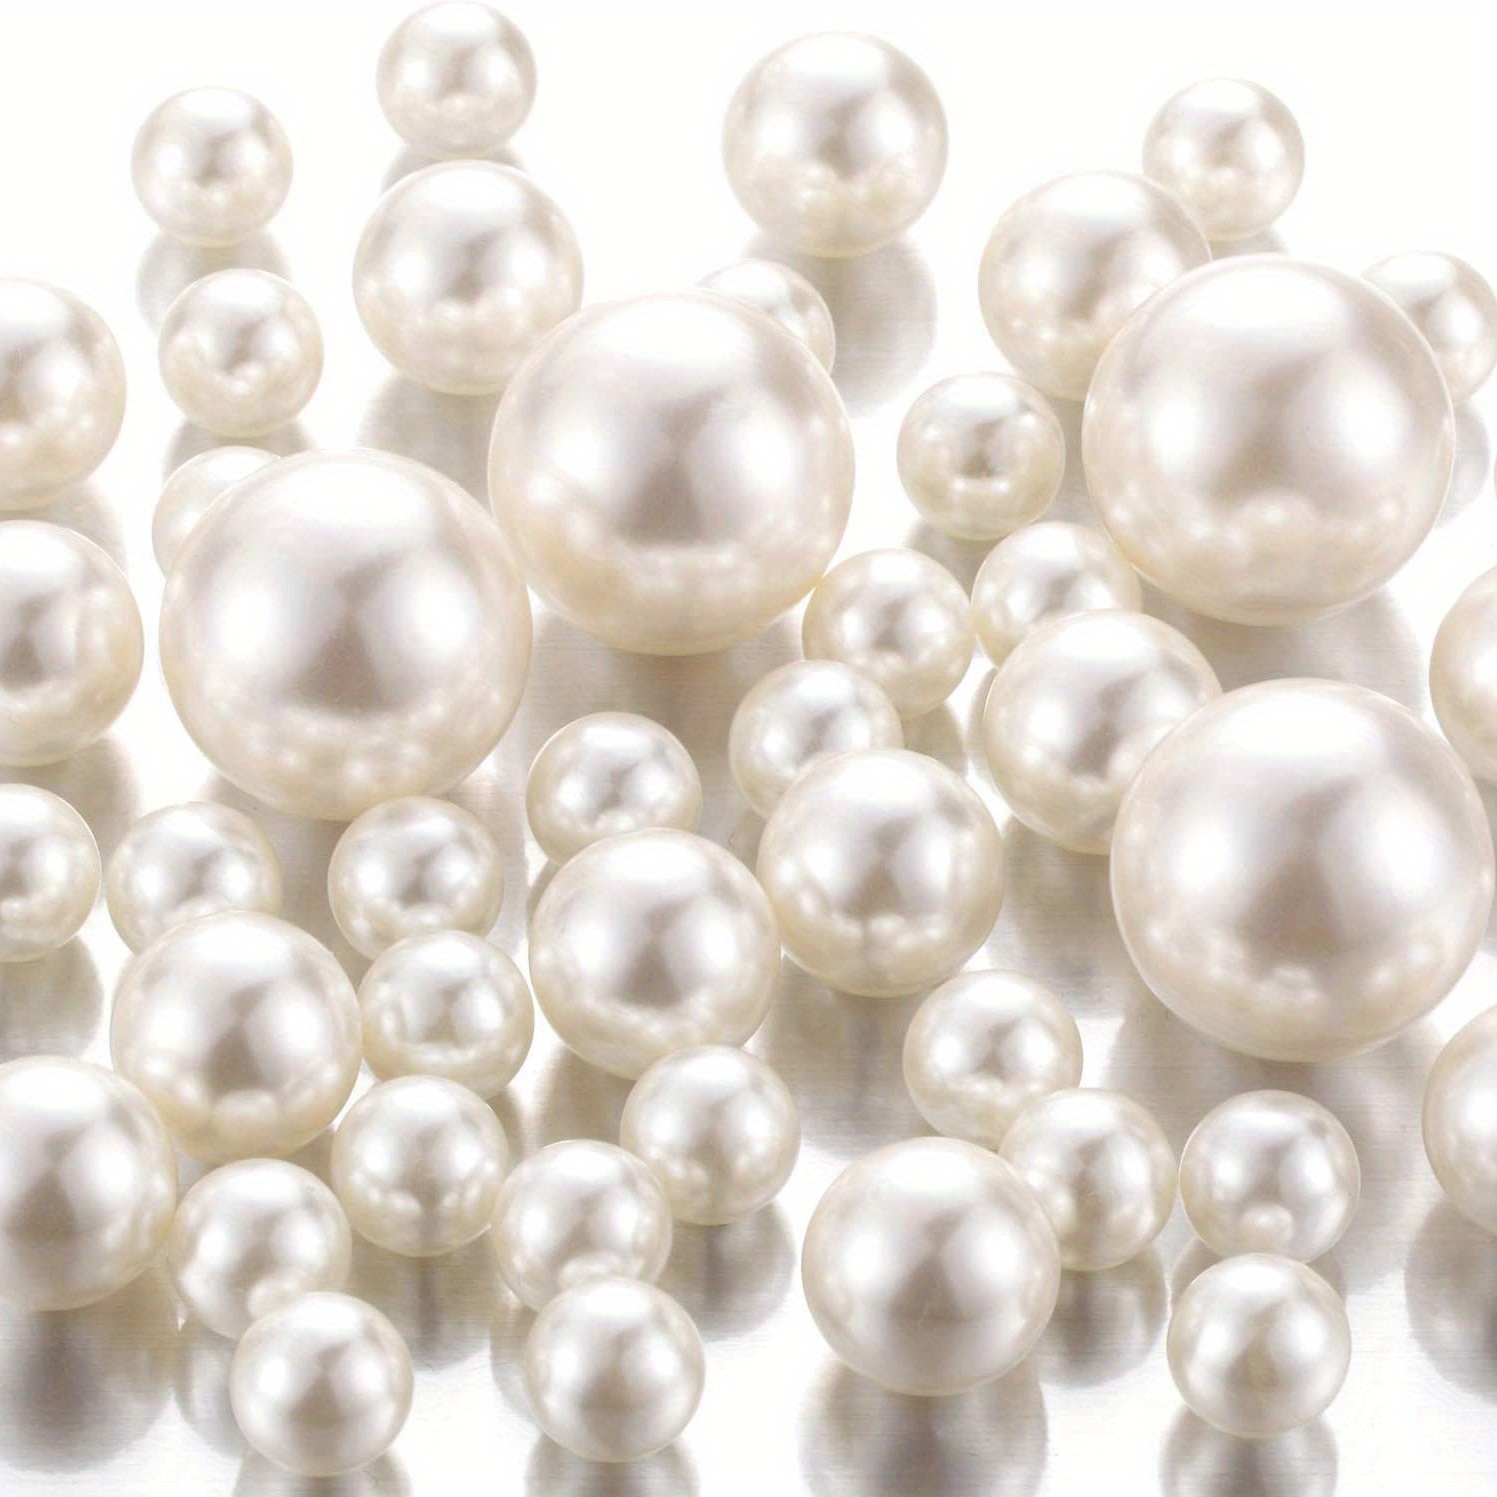  Floating Beads No Hole Pearl for Vases, Highlight Pearls Bead  Vase Filler for Centerpieces, Royal Blue Pearls 50 PCS, 30mm 20mm and 14mm,  DIY Wedding, Birthday, Anniversary, Christmas Centerpiece : Home